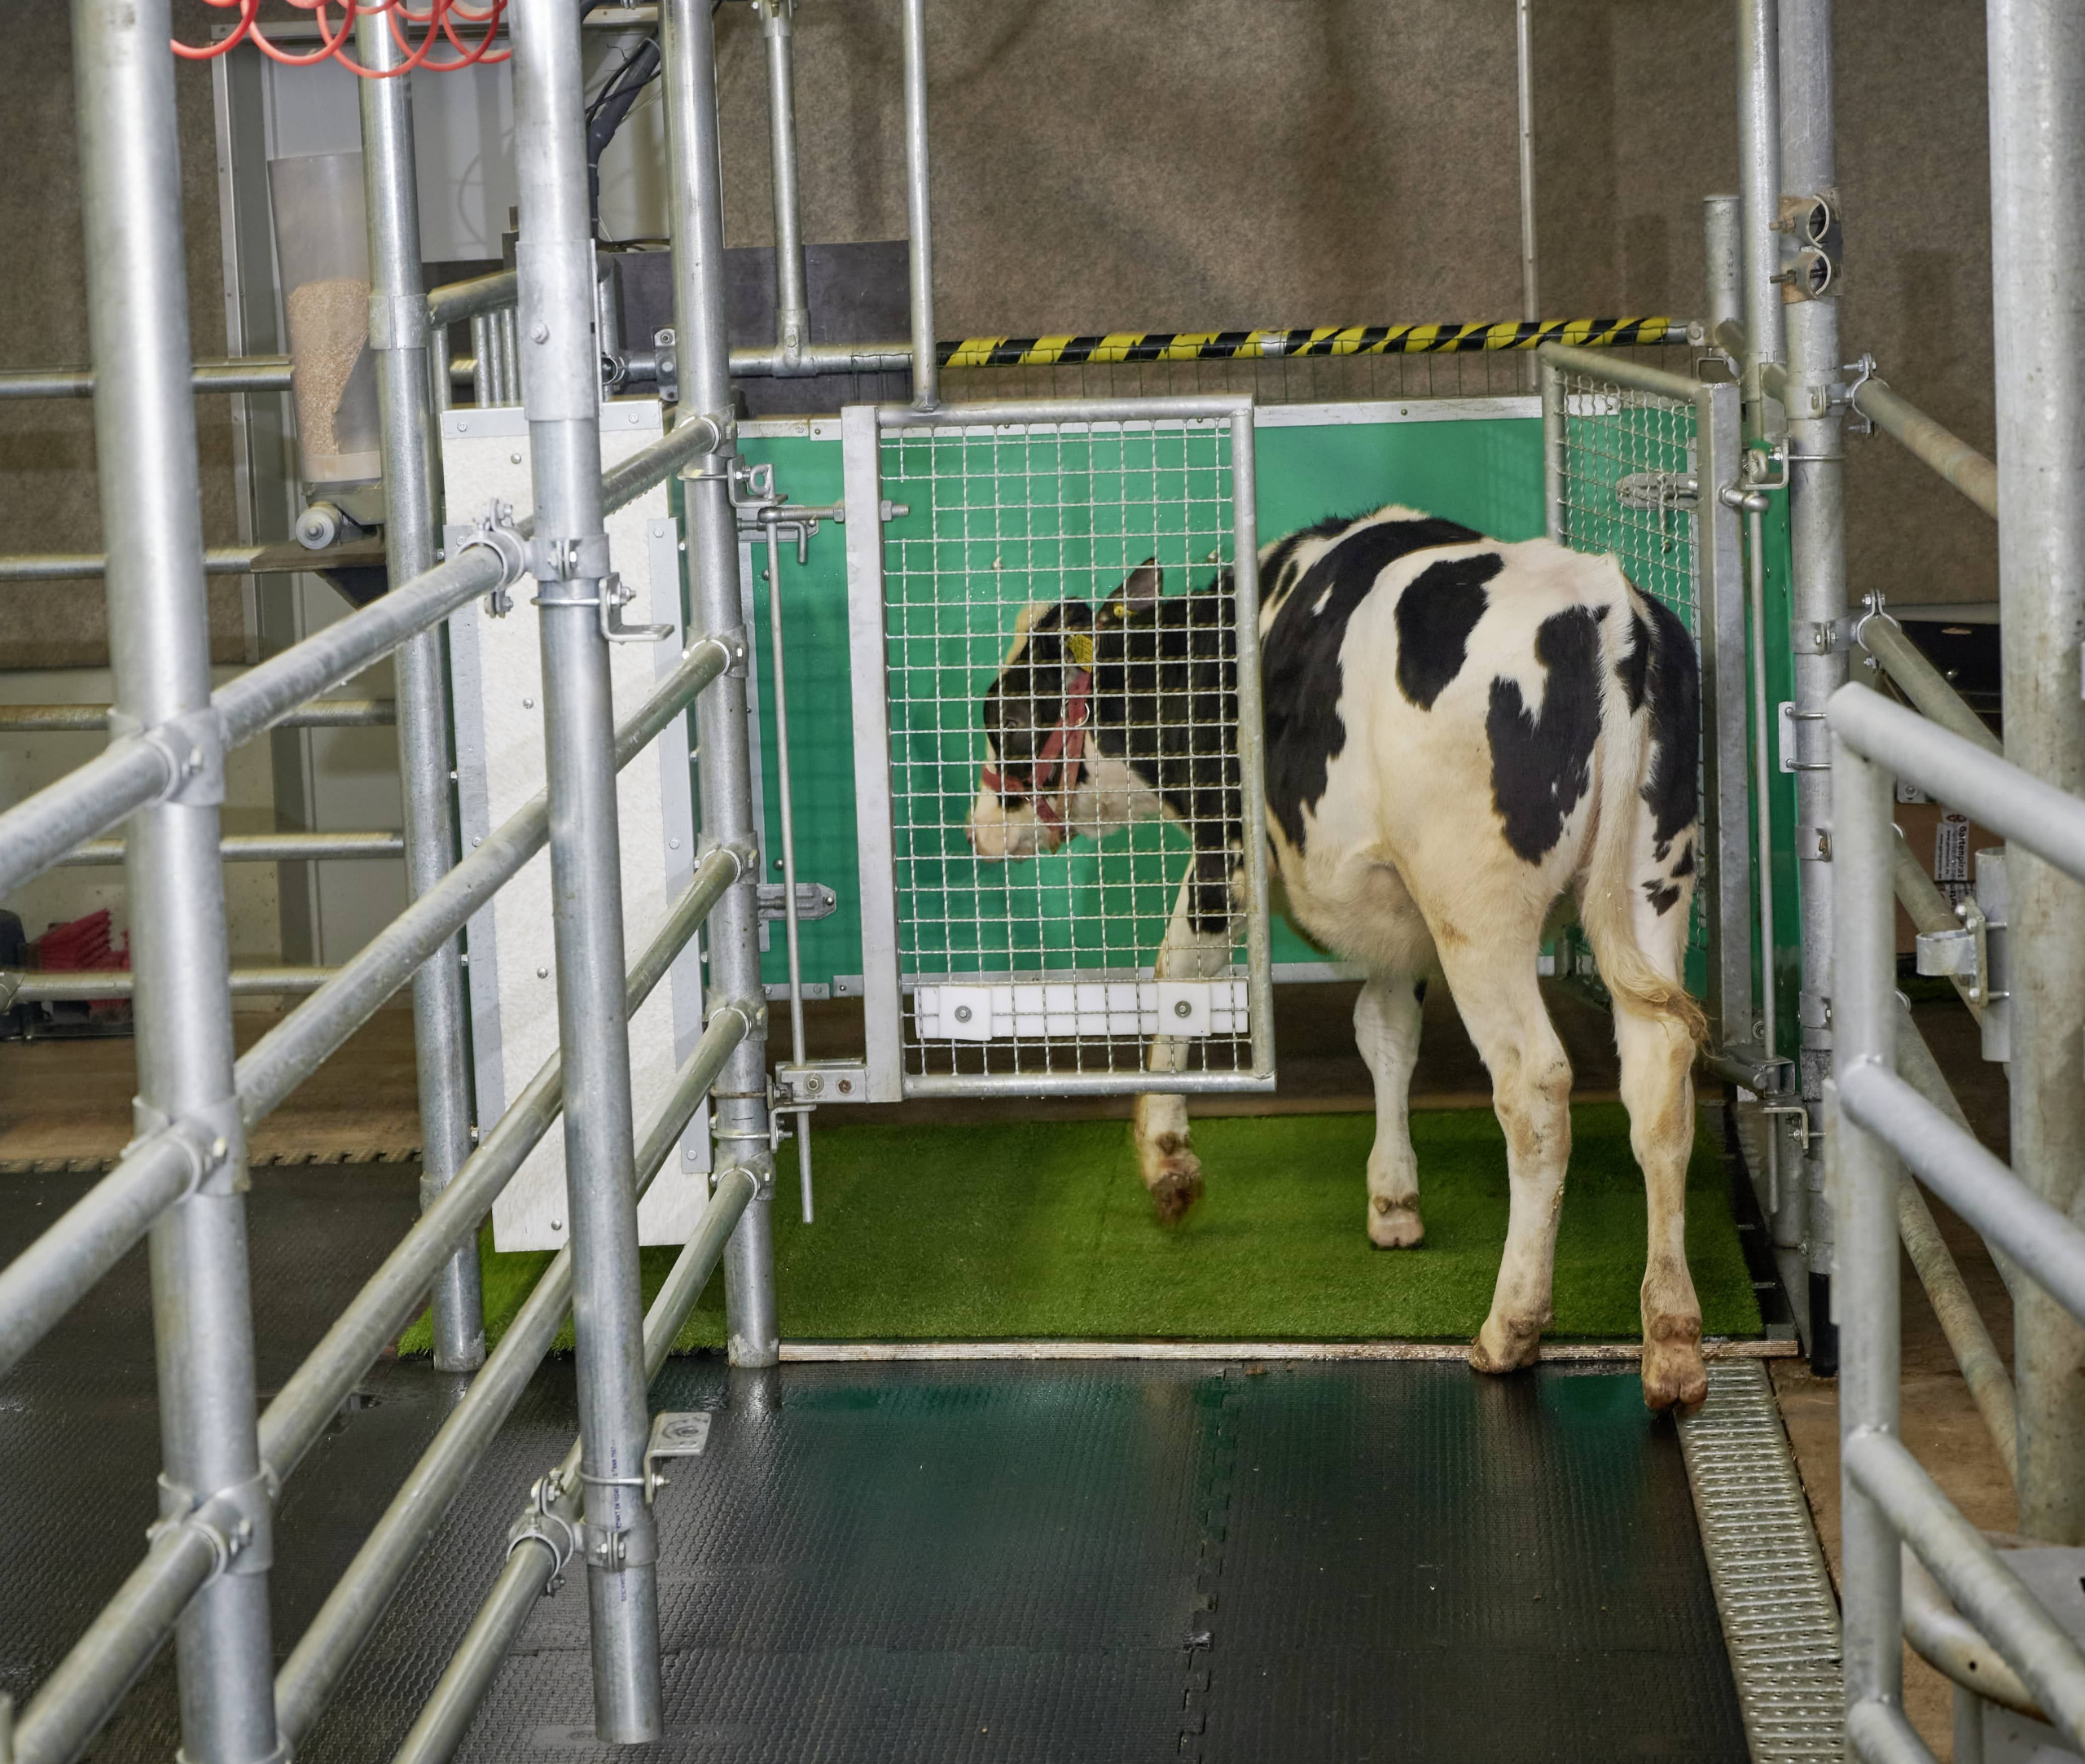 Potty Party: Researchers Show Young Cows Can Be Toilet-Trained